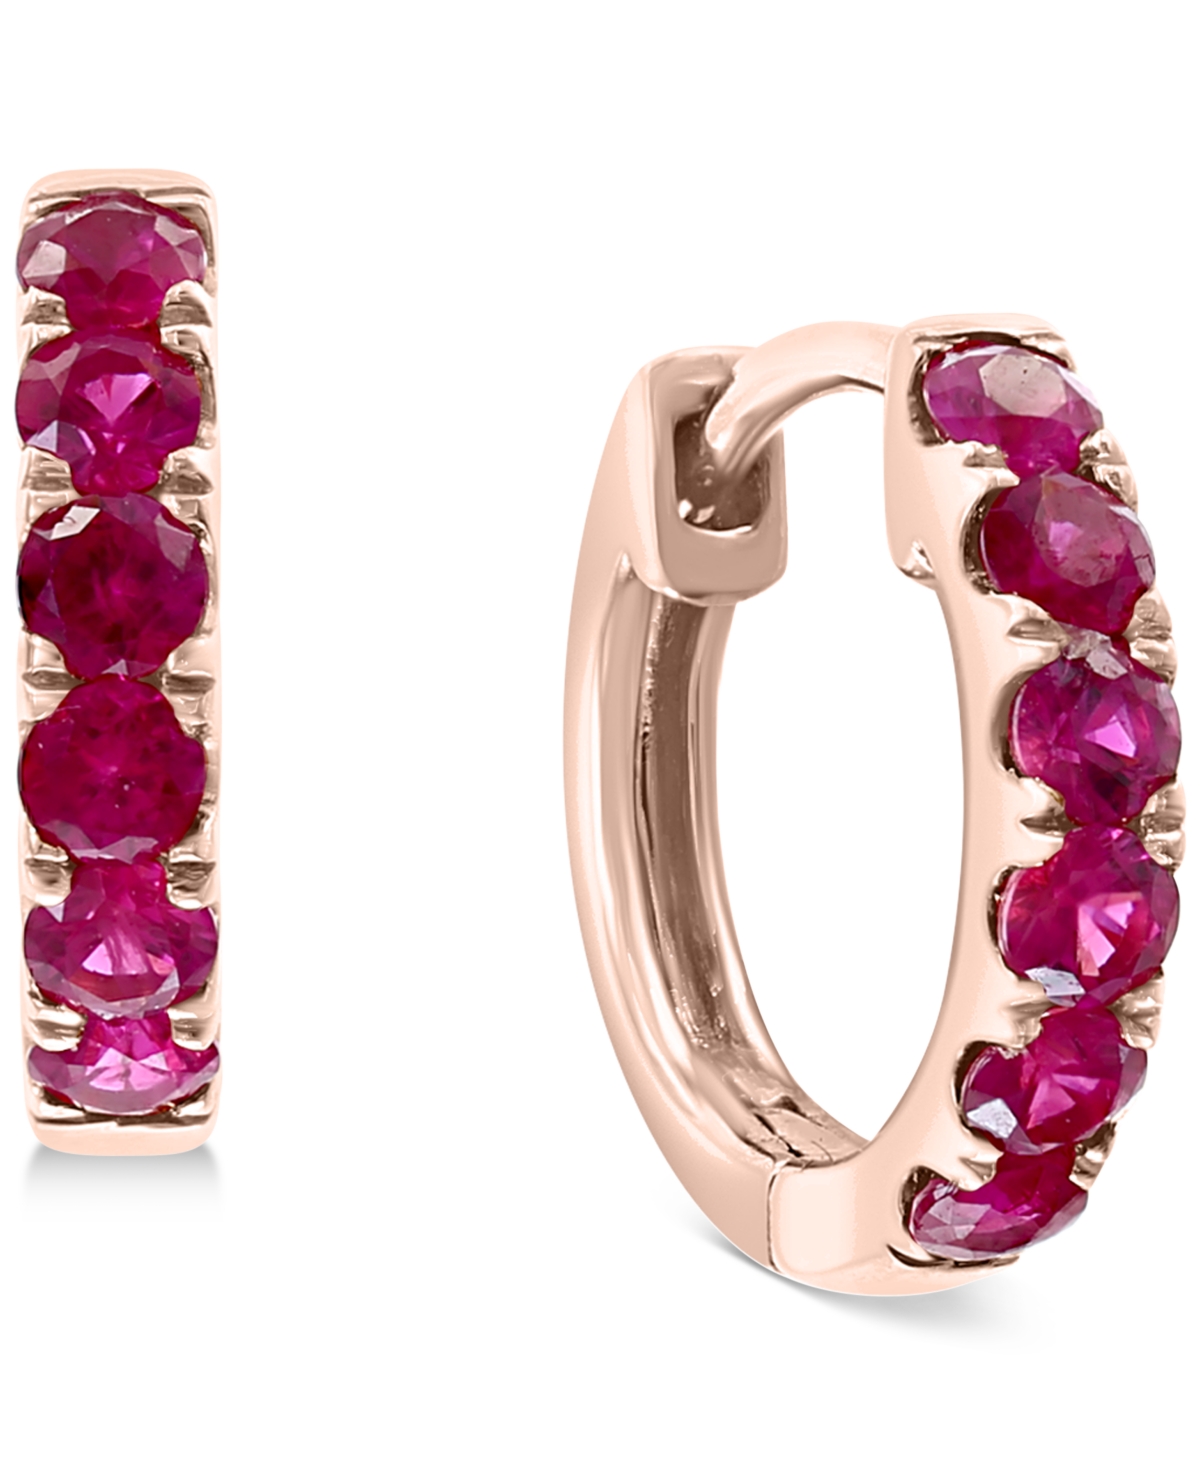 Effy Collection Effy Ruby Small Hoop Earrings (1/2 ct. t.w.) in 14k Rose Gold, 0.47" (Also in Sapphire)